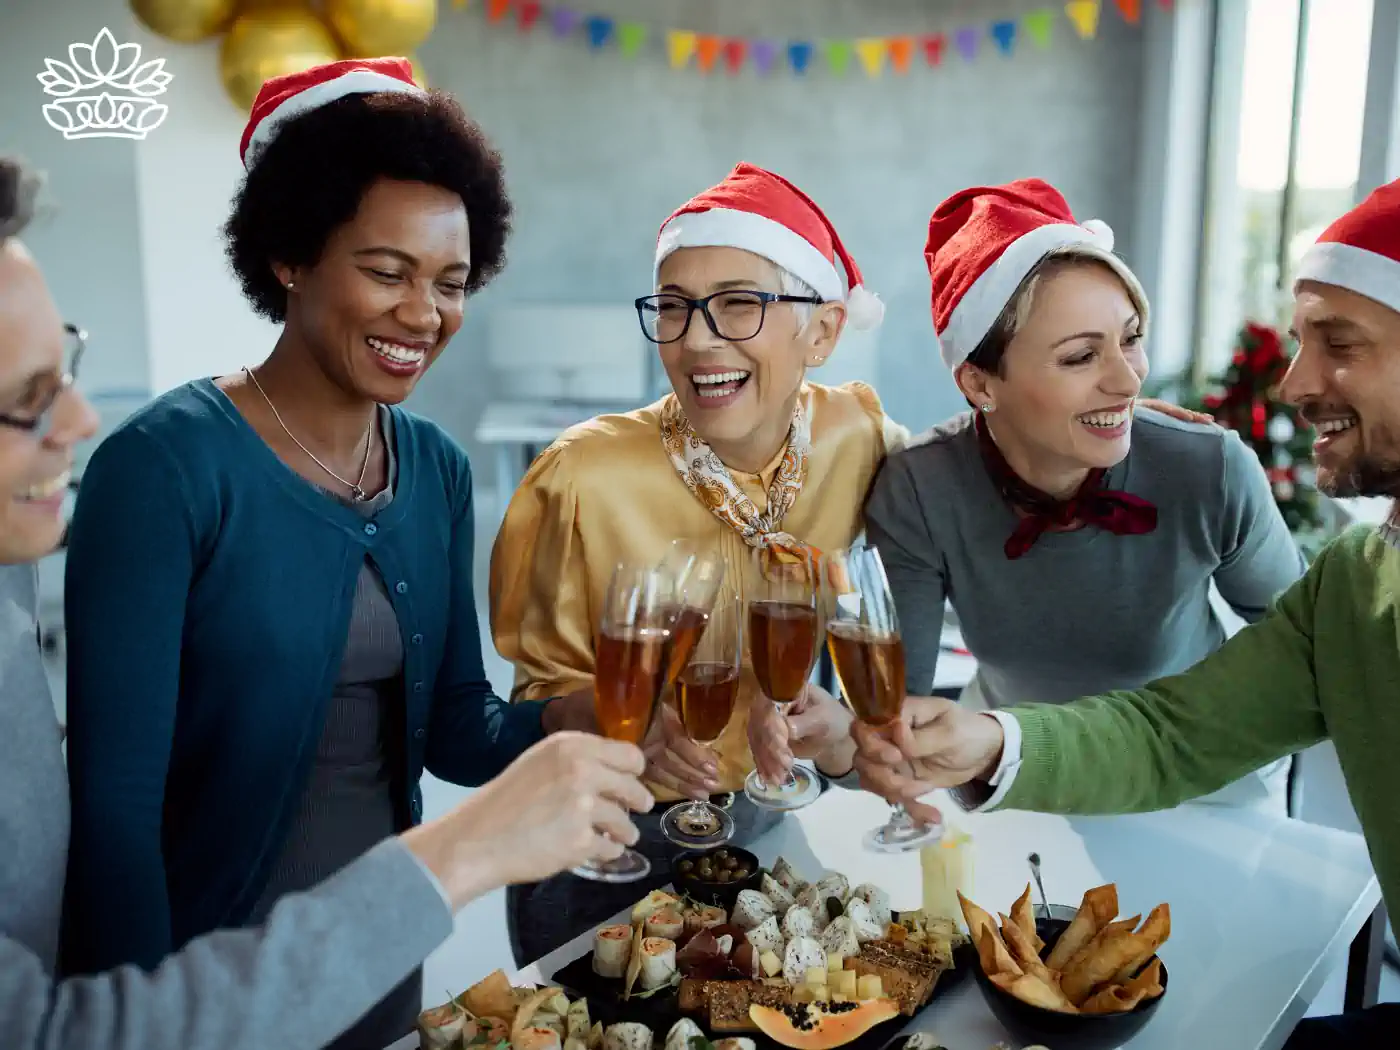 Friends in Santa hats toasting with champagne, enjoying a festive spread, surrounded by cheerful decorations, part of the Festive Season Flowers Collection. Delivered with Heart by Fabulous Flowers and Gifts.